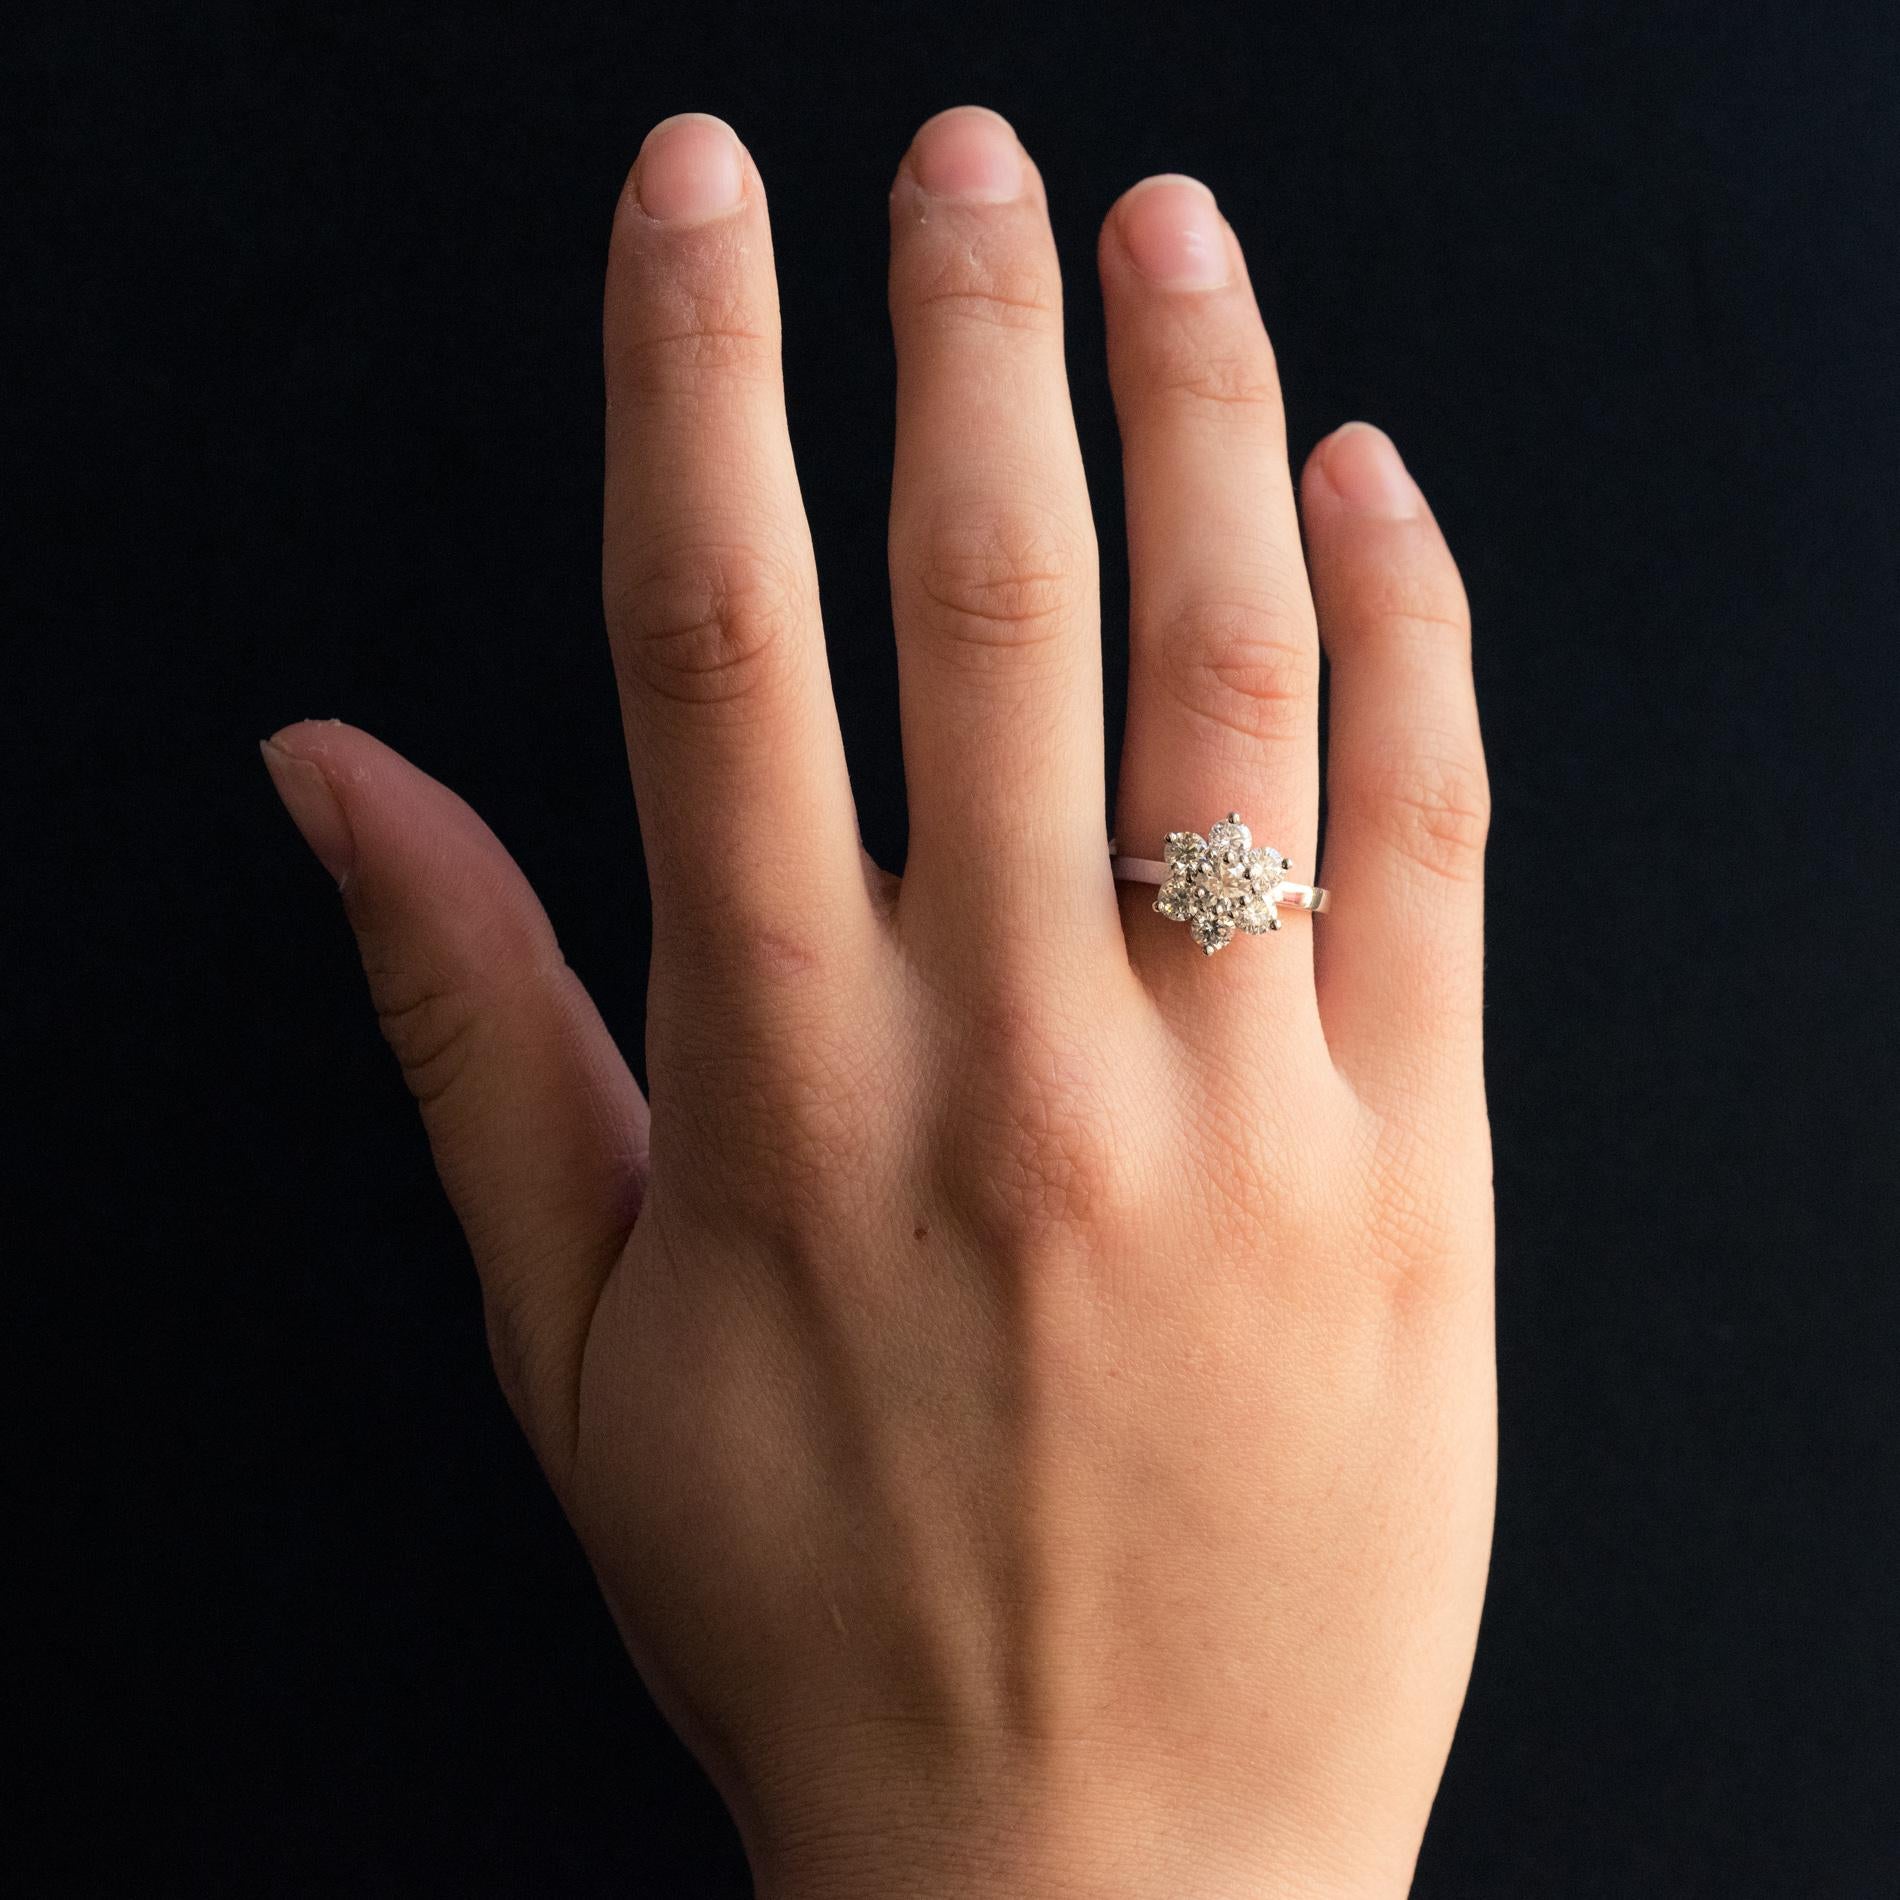 Ring in platinum, dog's head hallmark.
Lovely diamond ring, it forms a flower whose heart and petals are claws set of modern brilliant-cut diamonds.
Total weight of diamonds: approximately 1.53 carat.
Height: 12.5 mm, width: 11.1 mm, thickness: 7.1